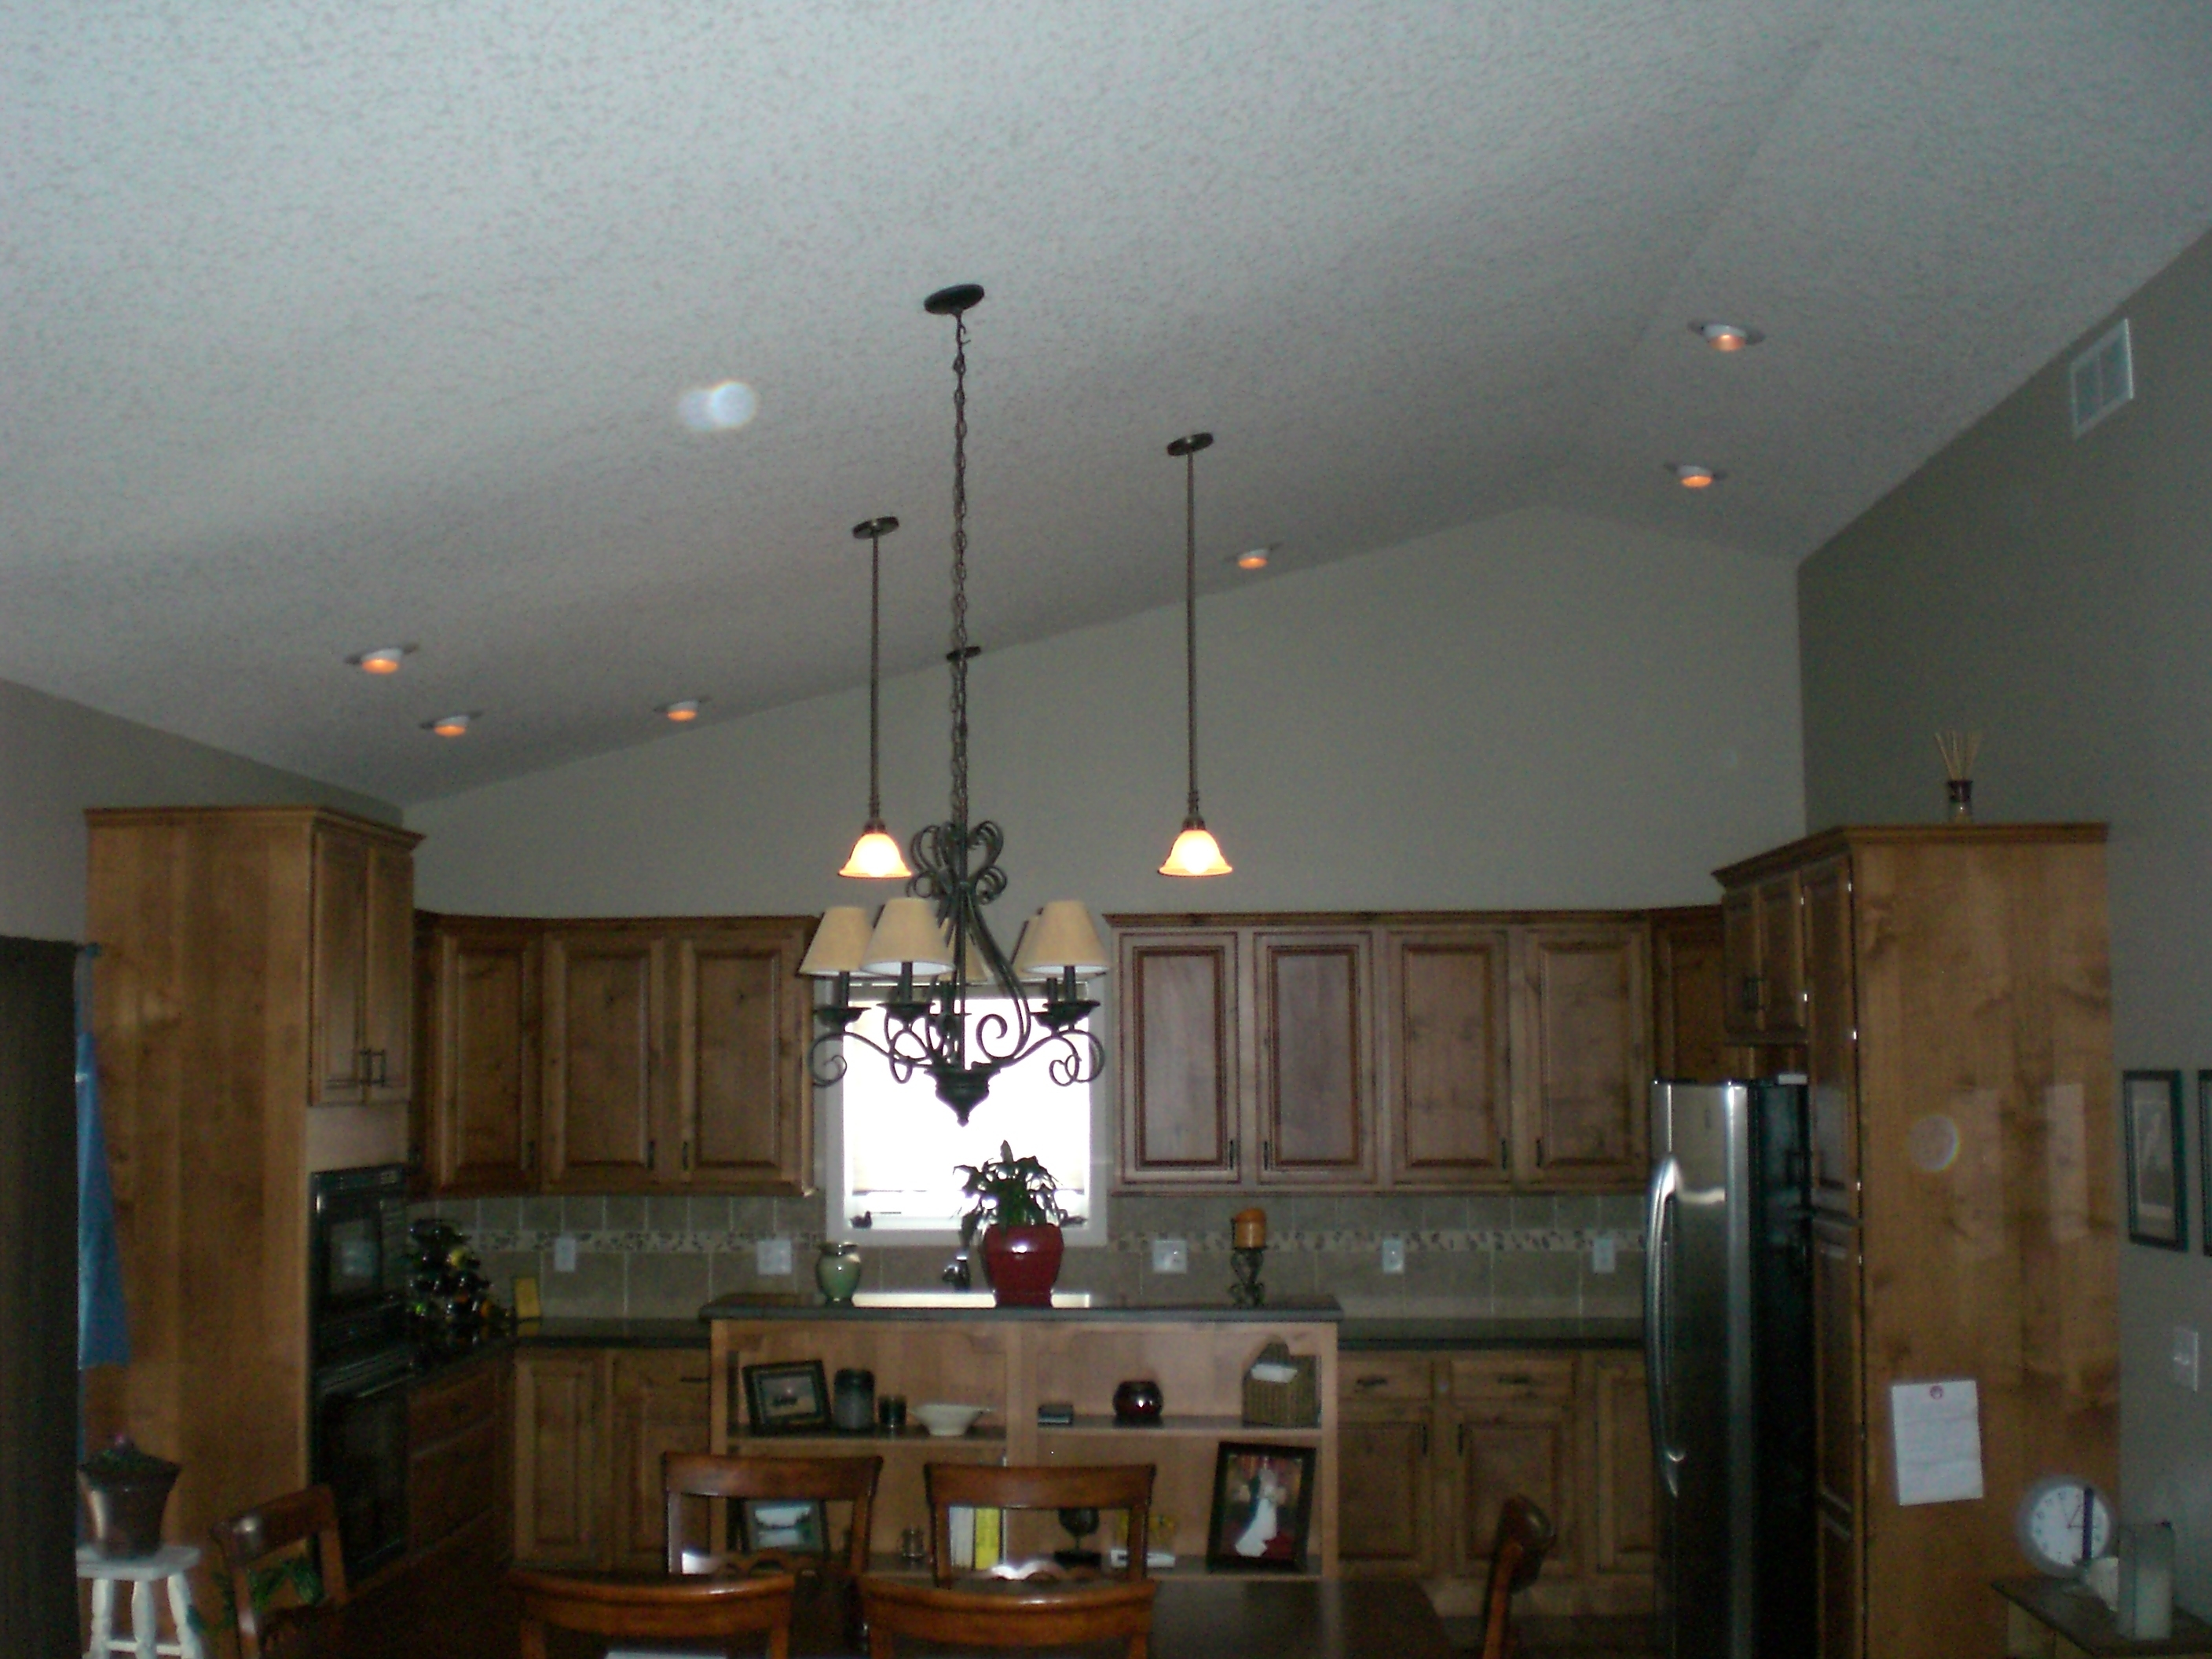 Led Recessed Lighting For Vaulted Ceilings2816 X 2112